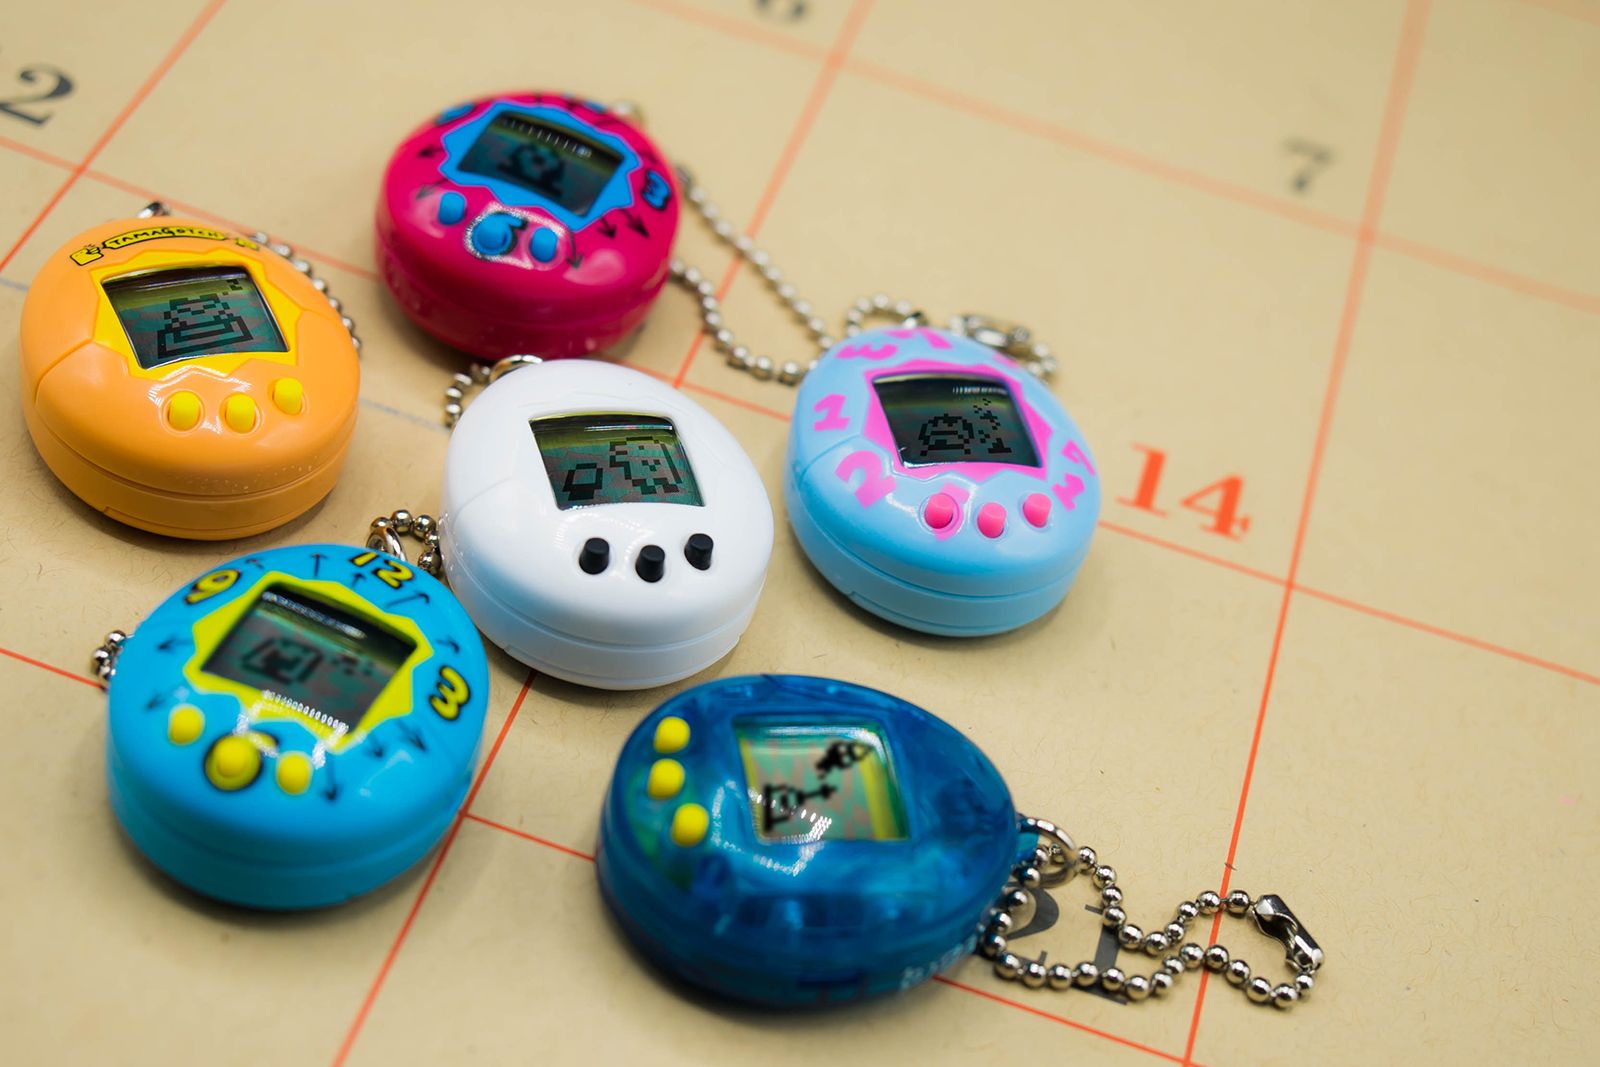 Iconic gadgets of the 90s Amazing gadgets and gizmos from yesteryear image 2